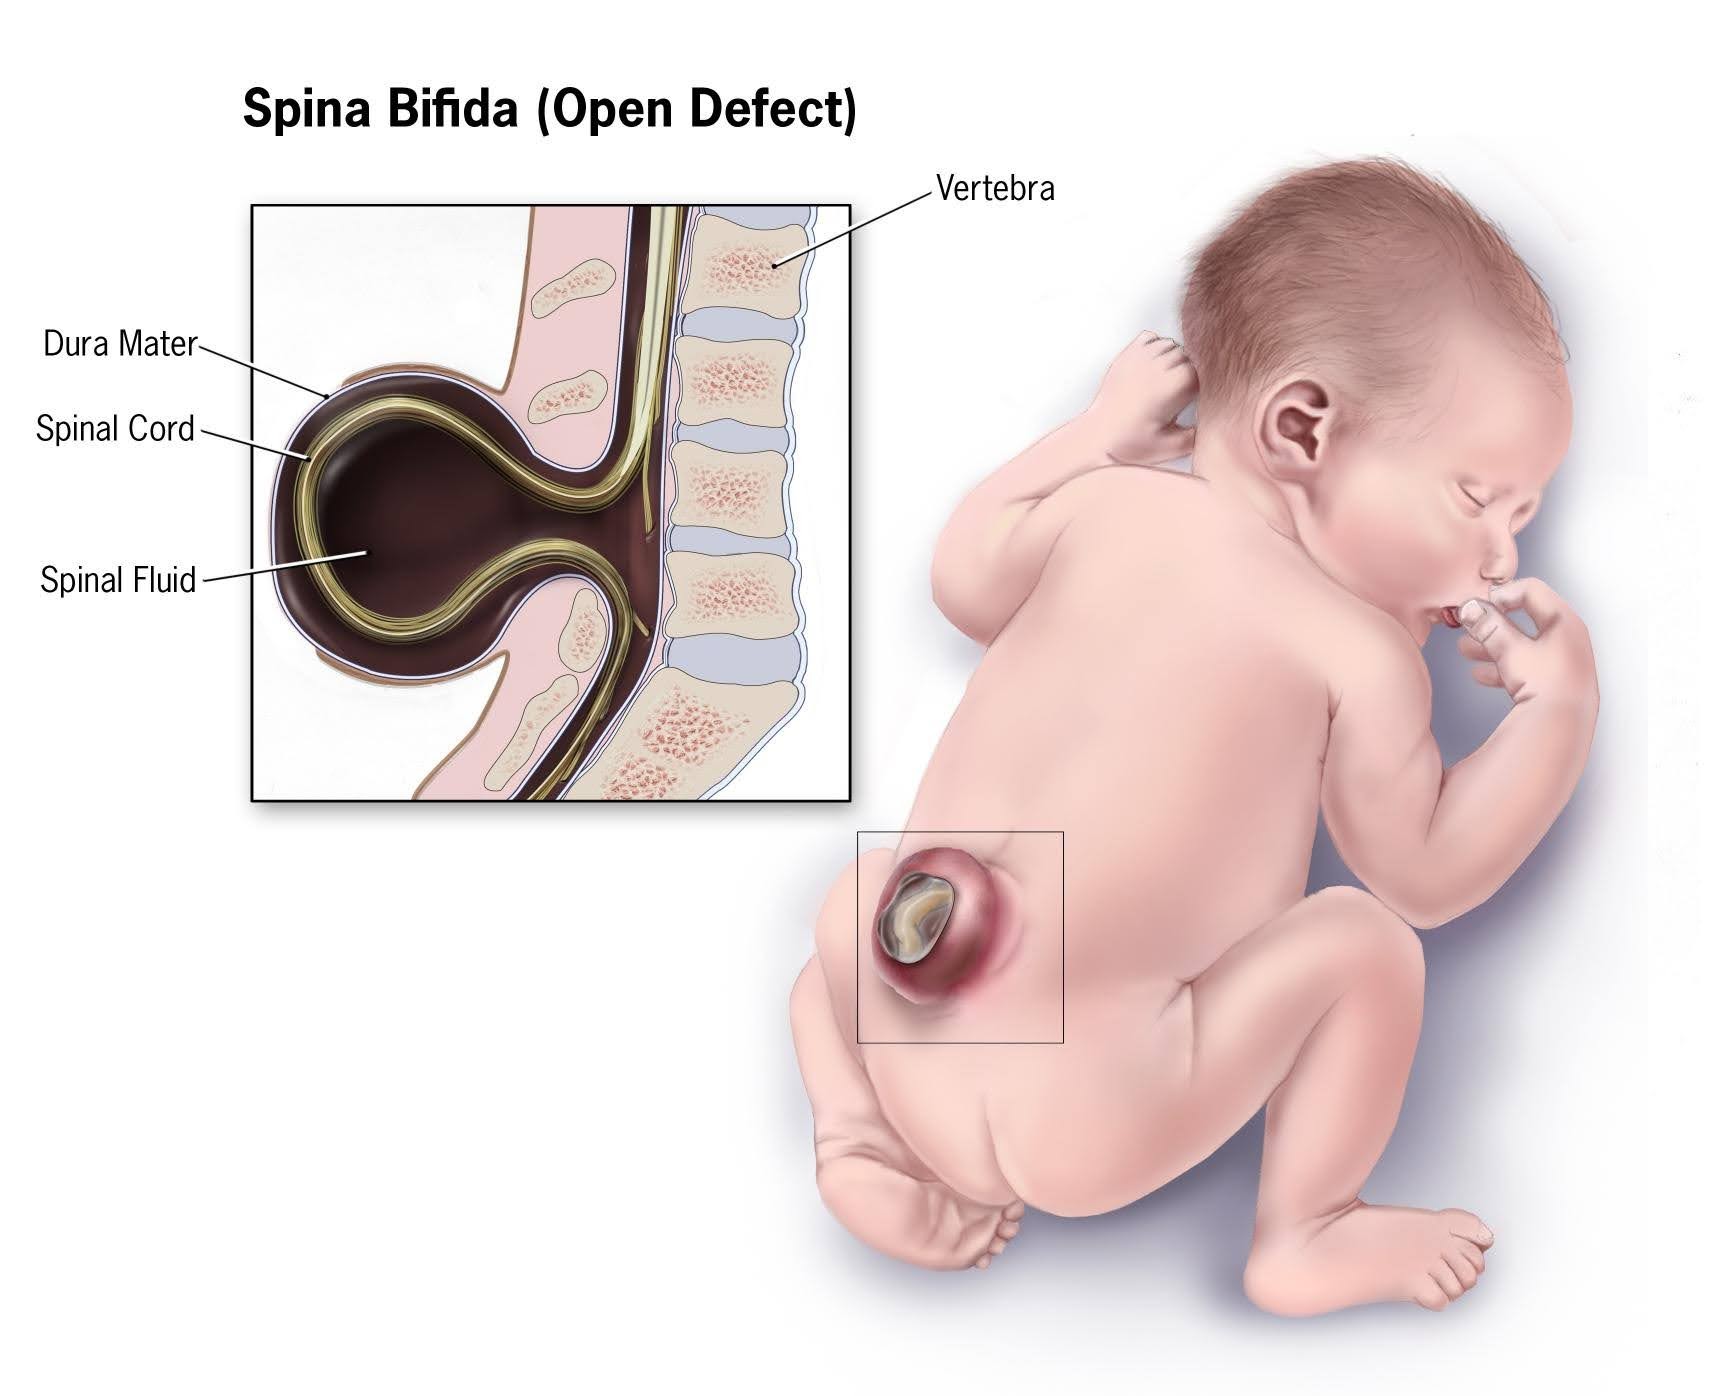 In this article I am going to give you the most important information related to spina bifida, and you will also find ultrasound photos related to the diagnosis of spina bifida.